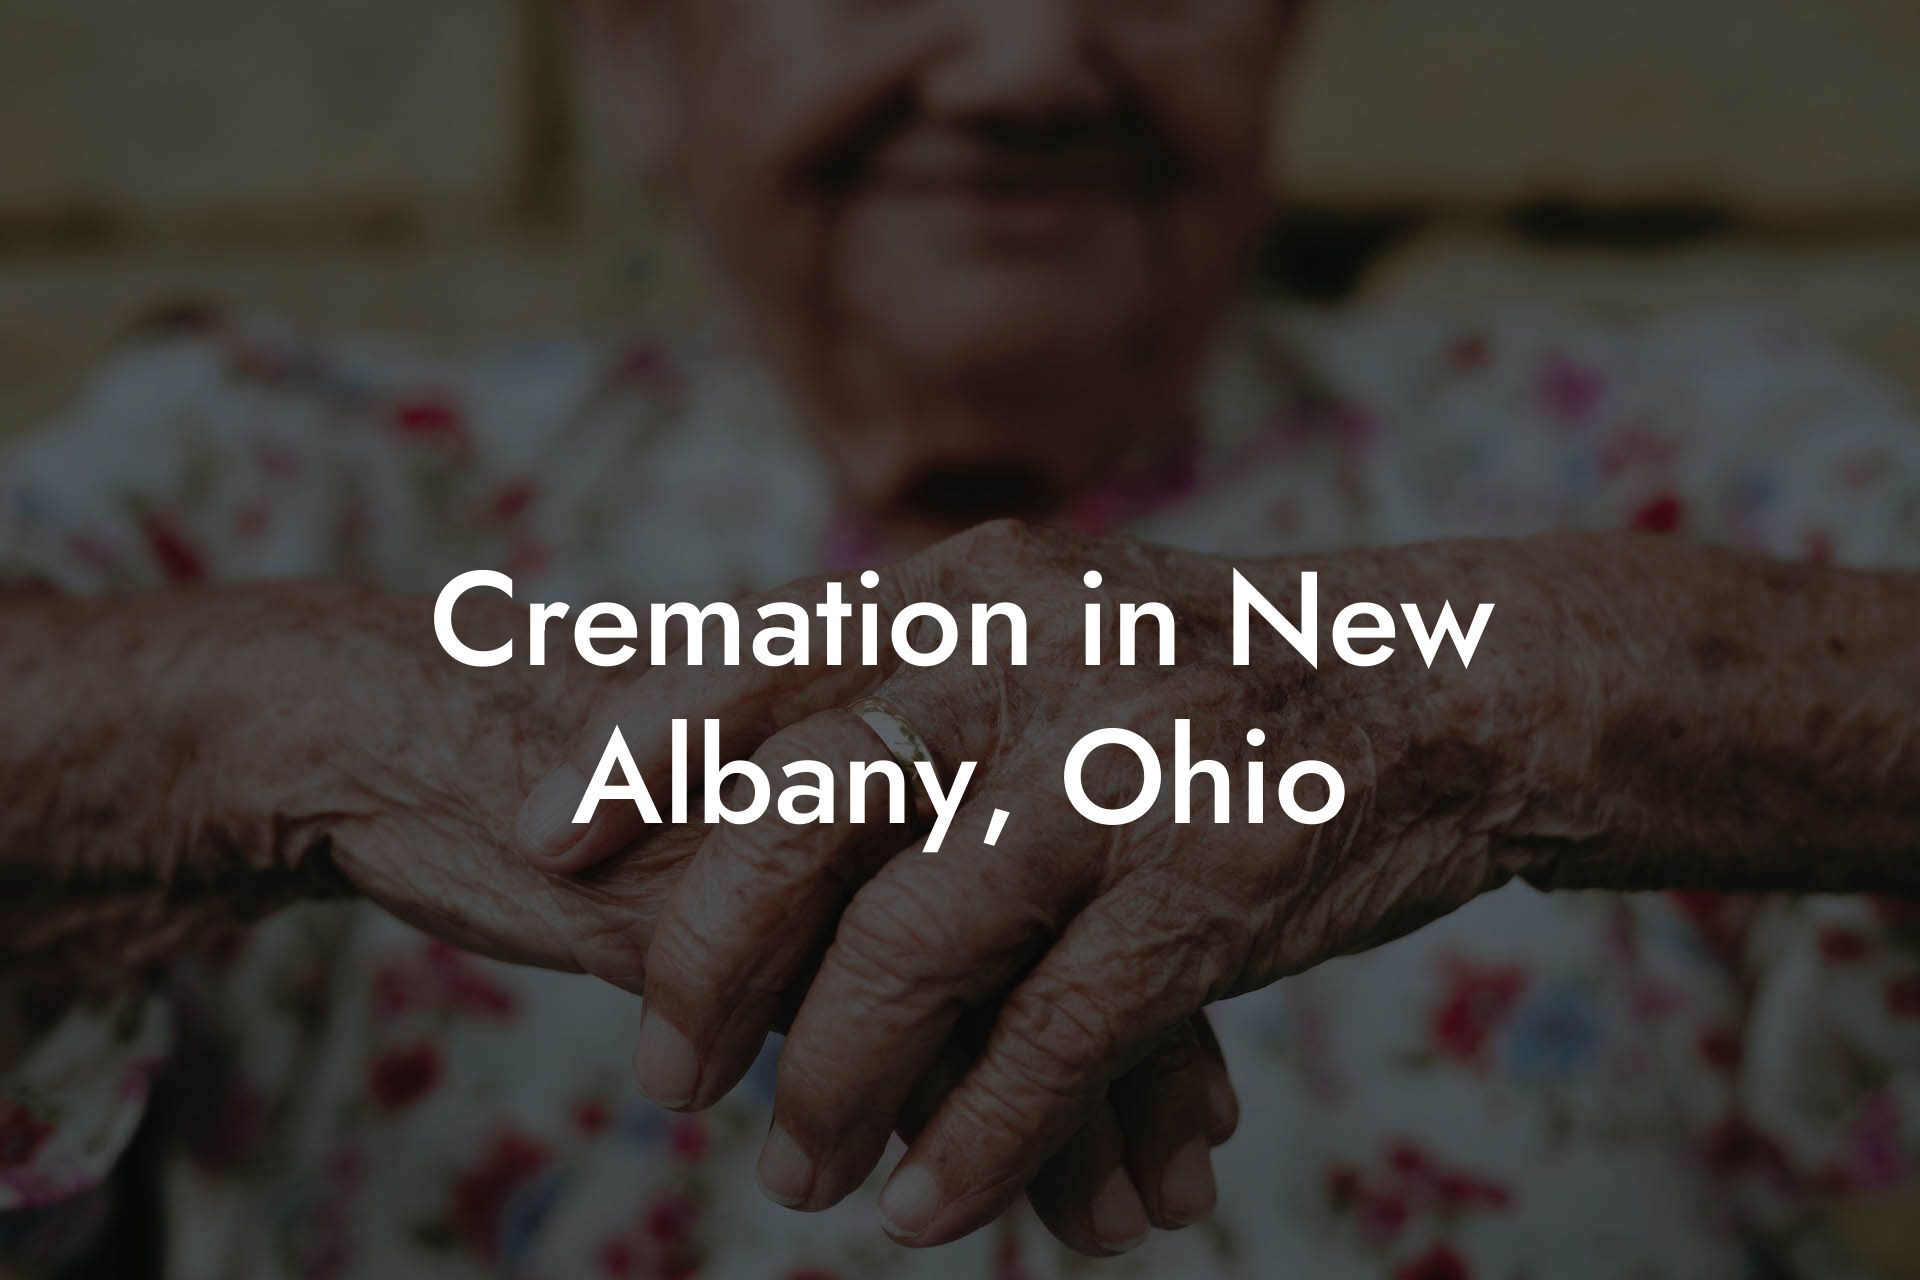 Cremation in New Albany, Ohio